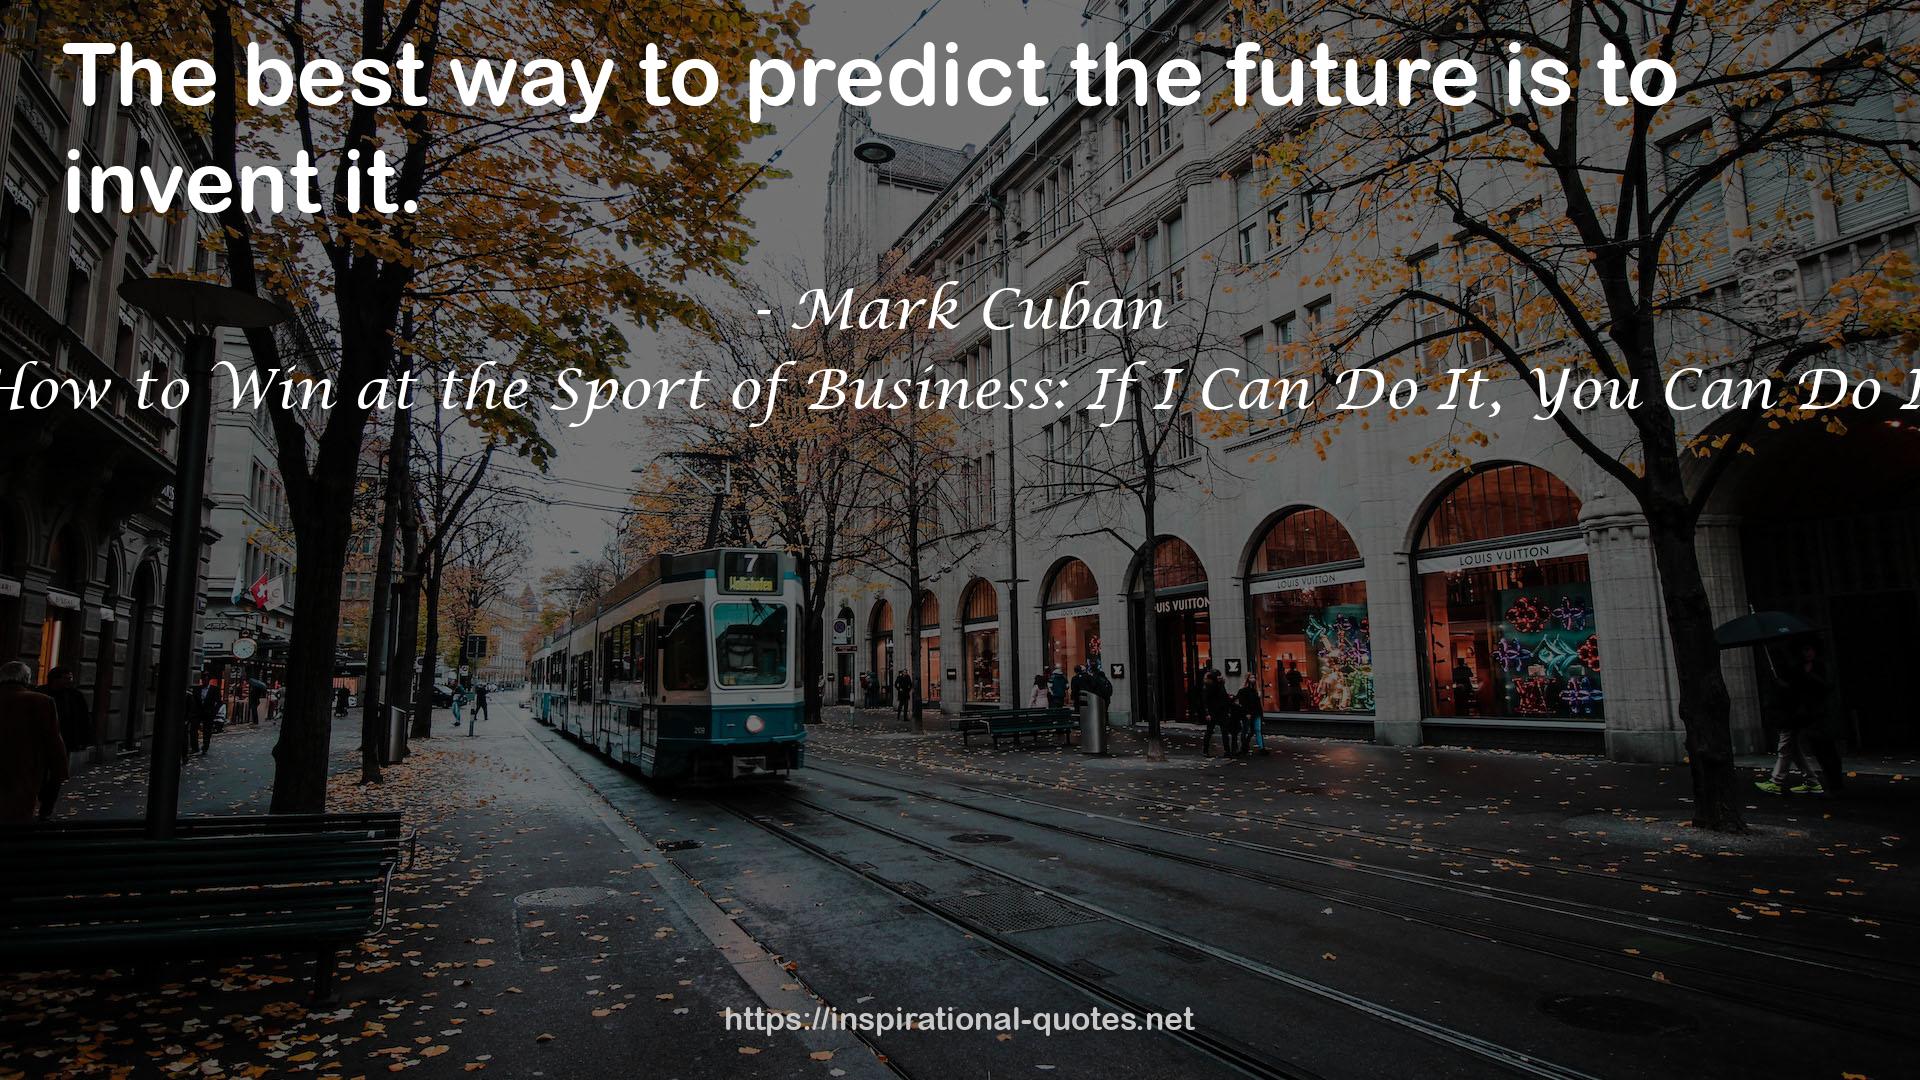 How to Win at the Sport of Business: If I Can Do It, You Can Do It QUOTES